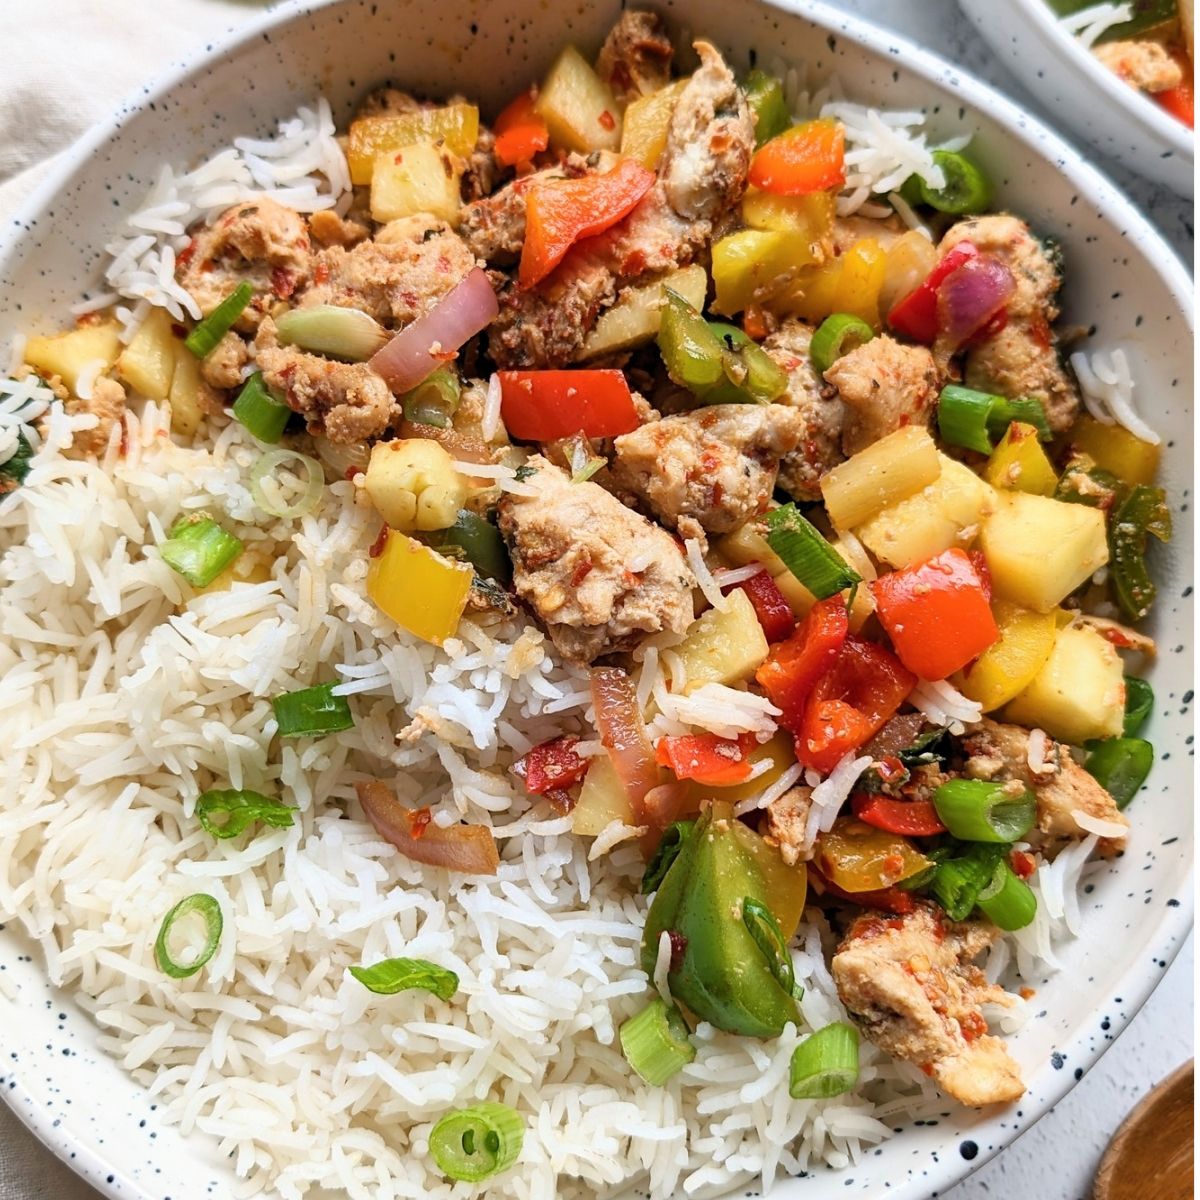 low sodium pineapple chicken bowls with red and green bell peppers, fresh pineapple, cilantro, and a tangy pineapple sauce over rice